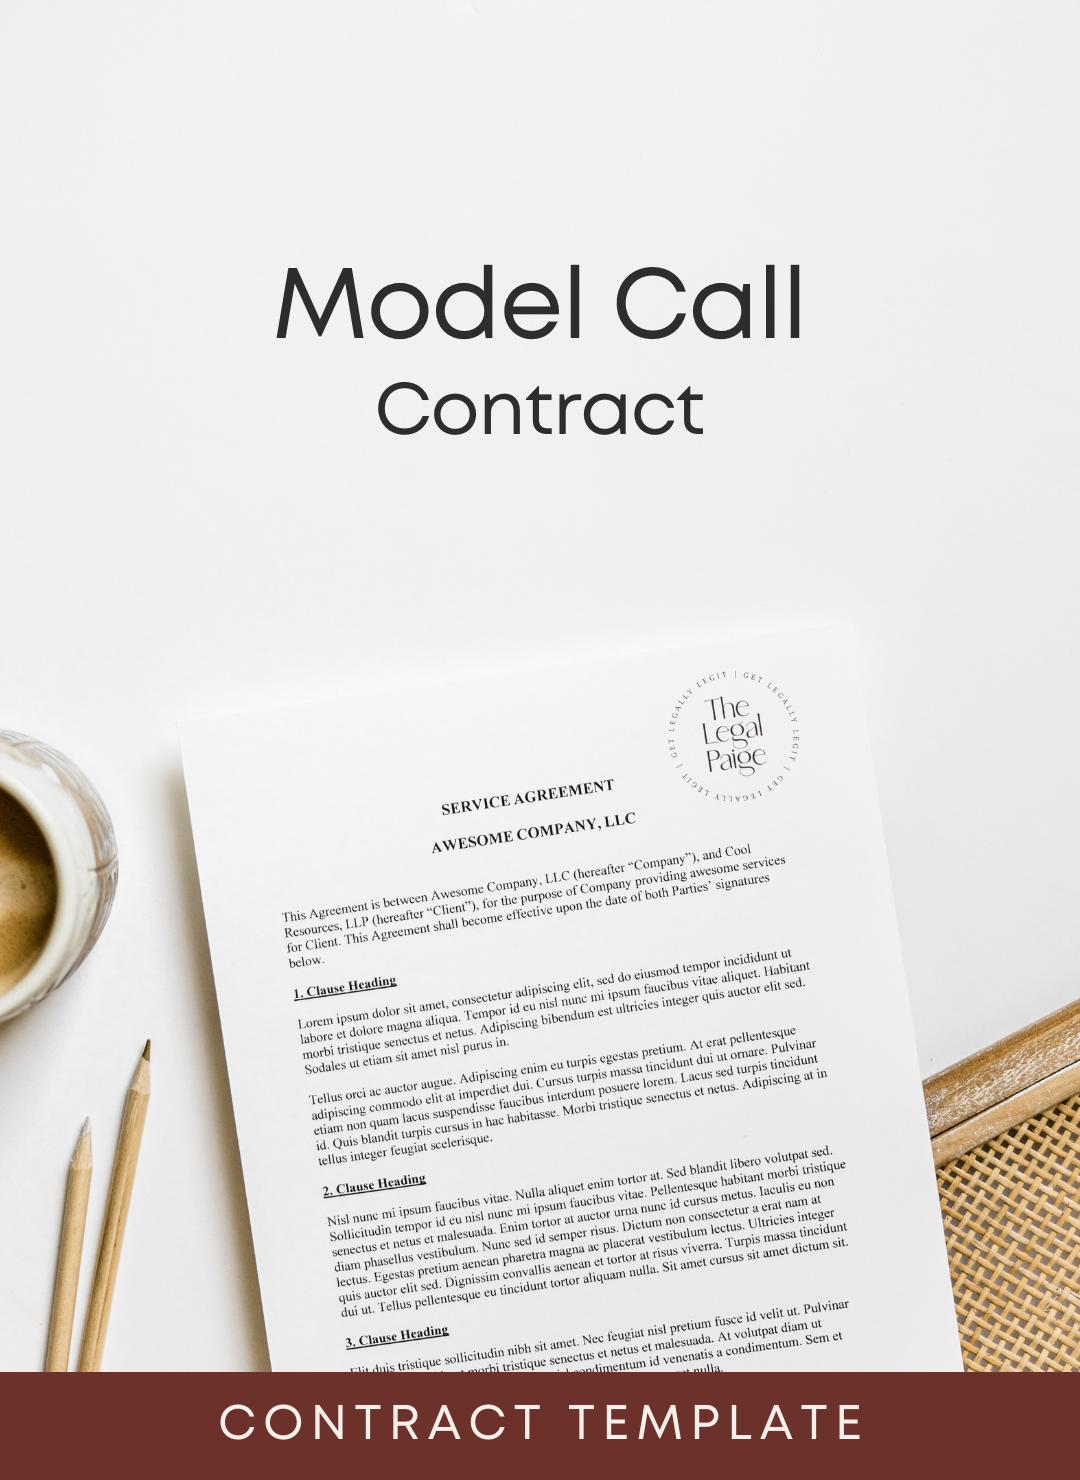 The Legal Paige - Model Call Contract